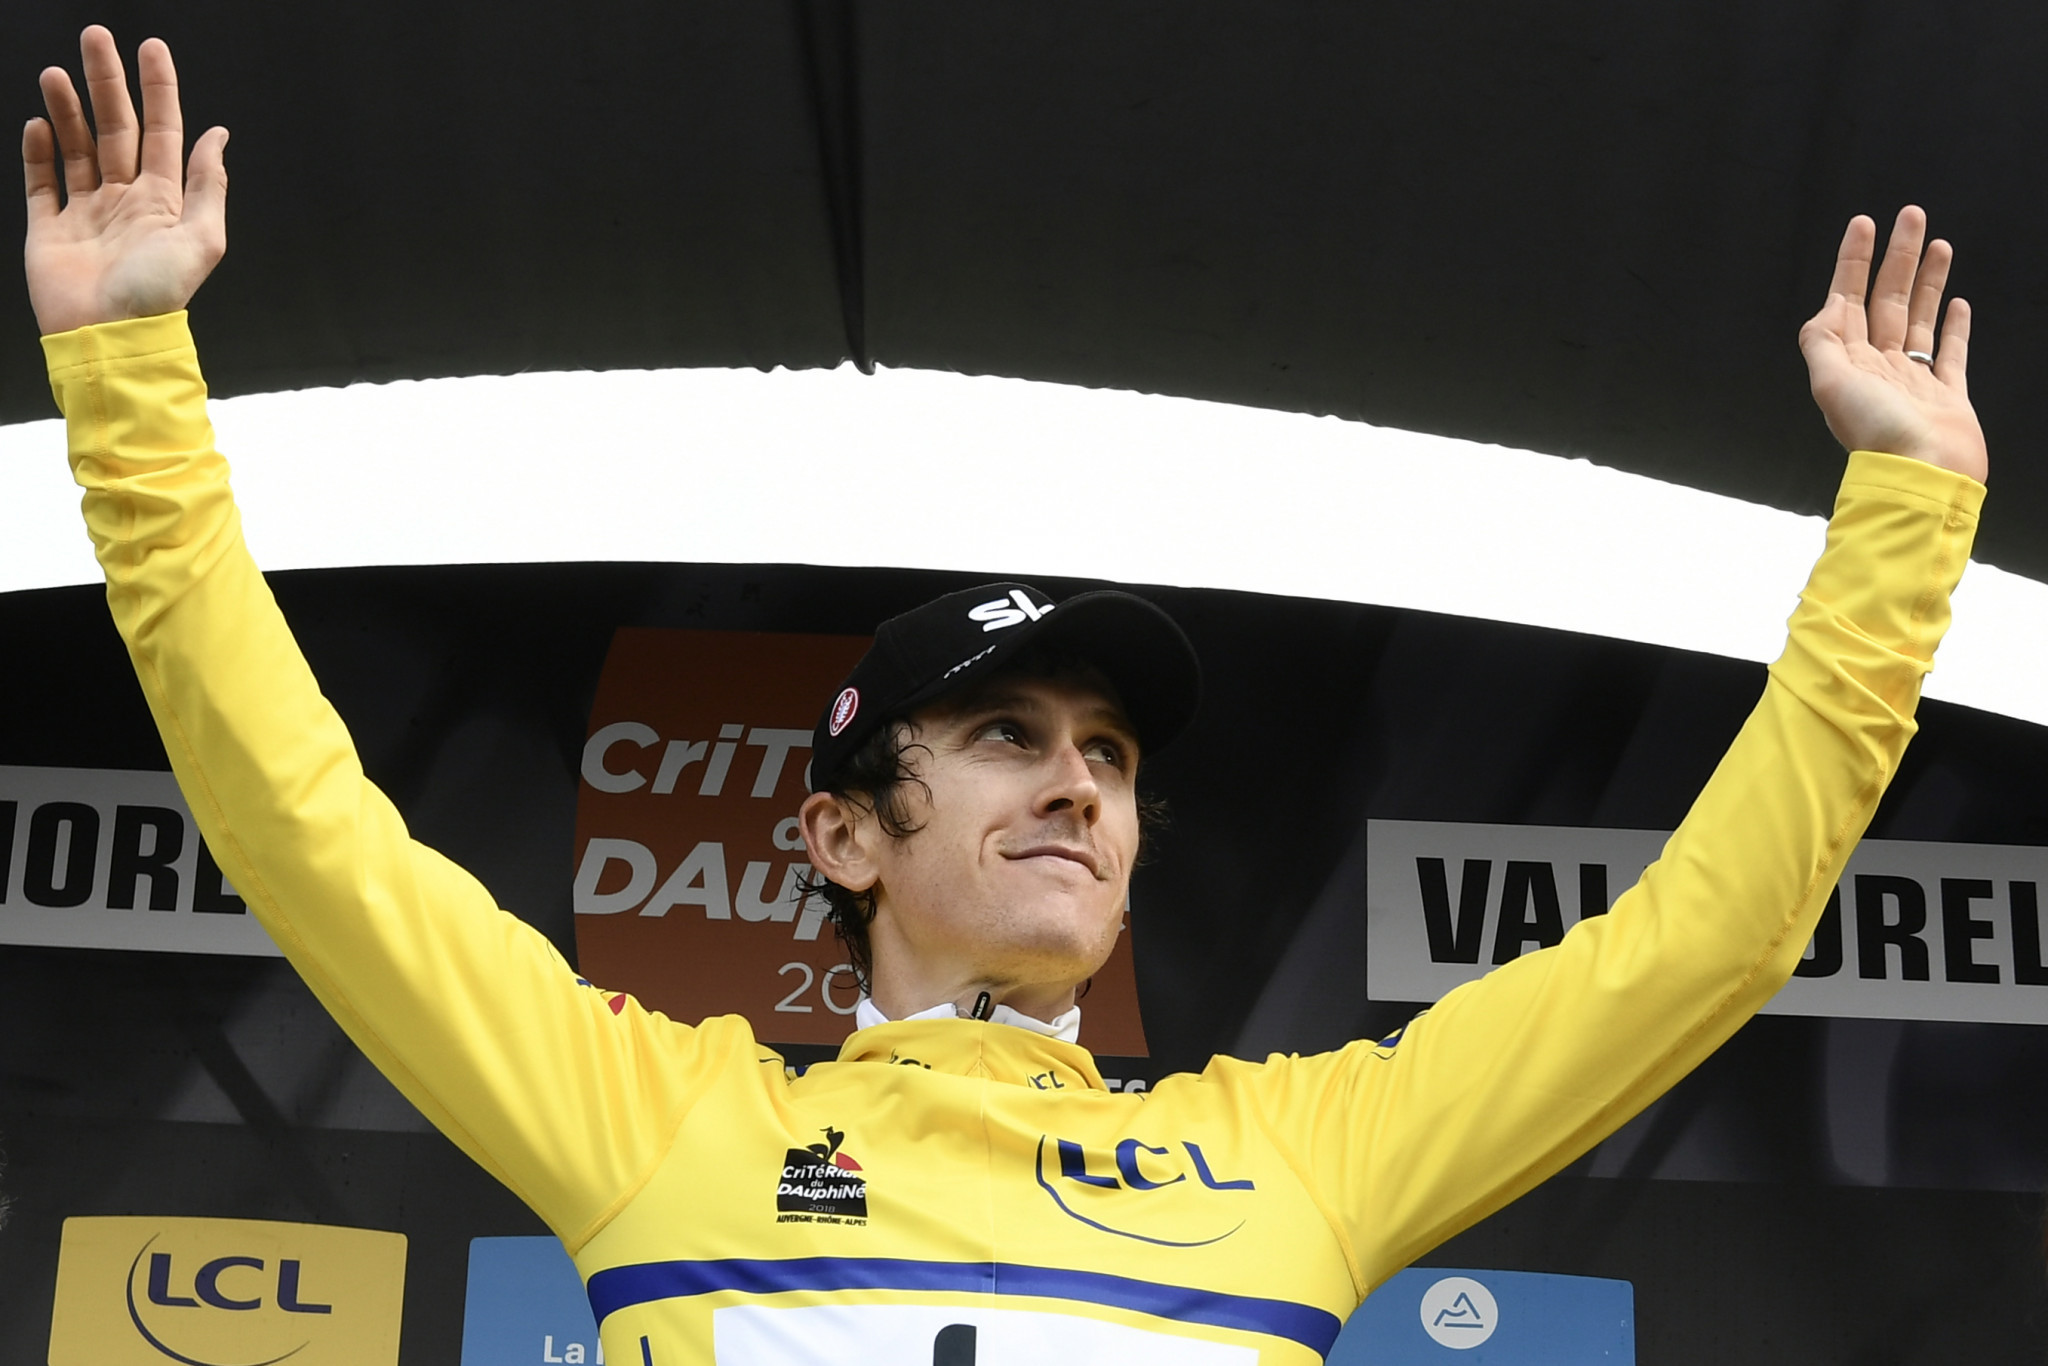 Geraint Thomas now holds the leader's yellow jersey ©Getty Images